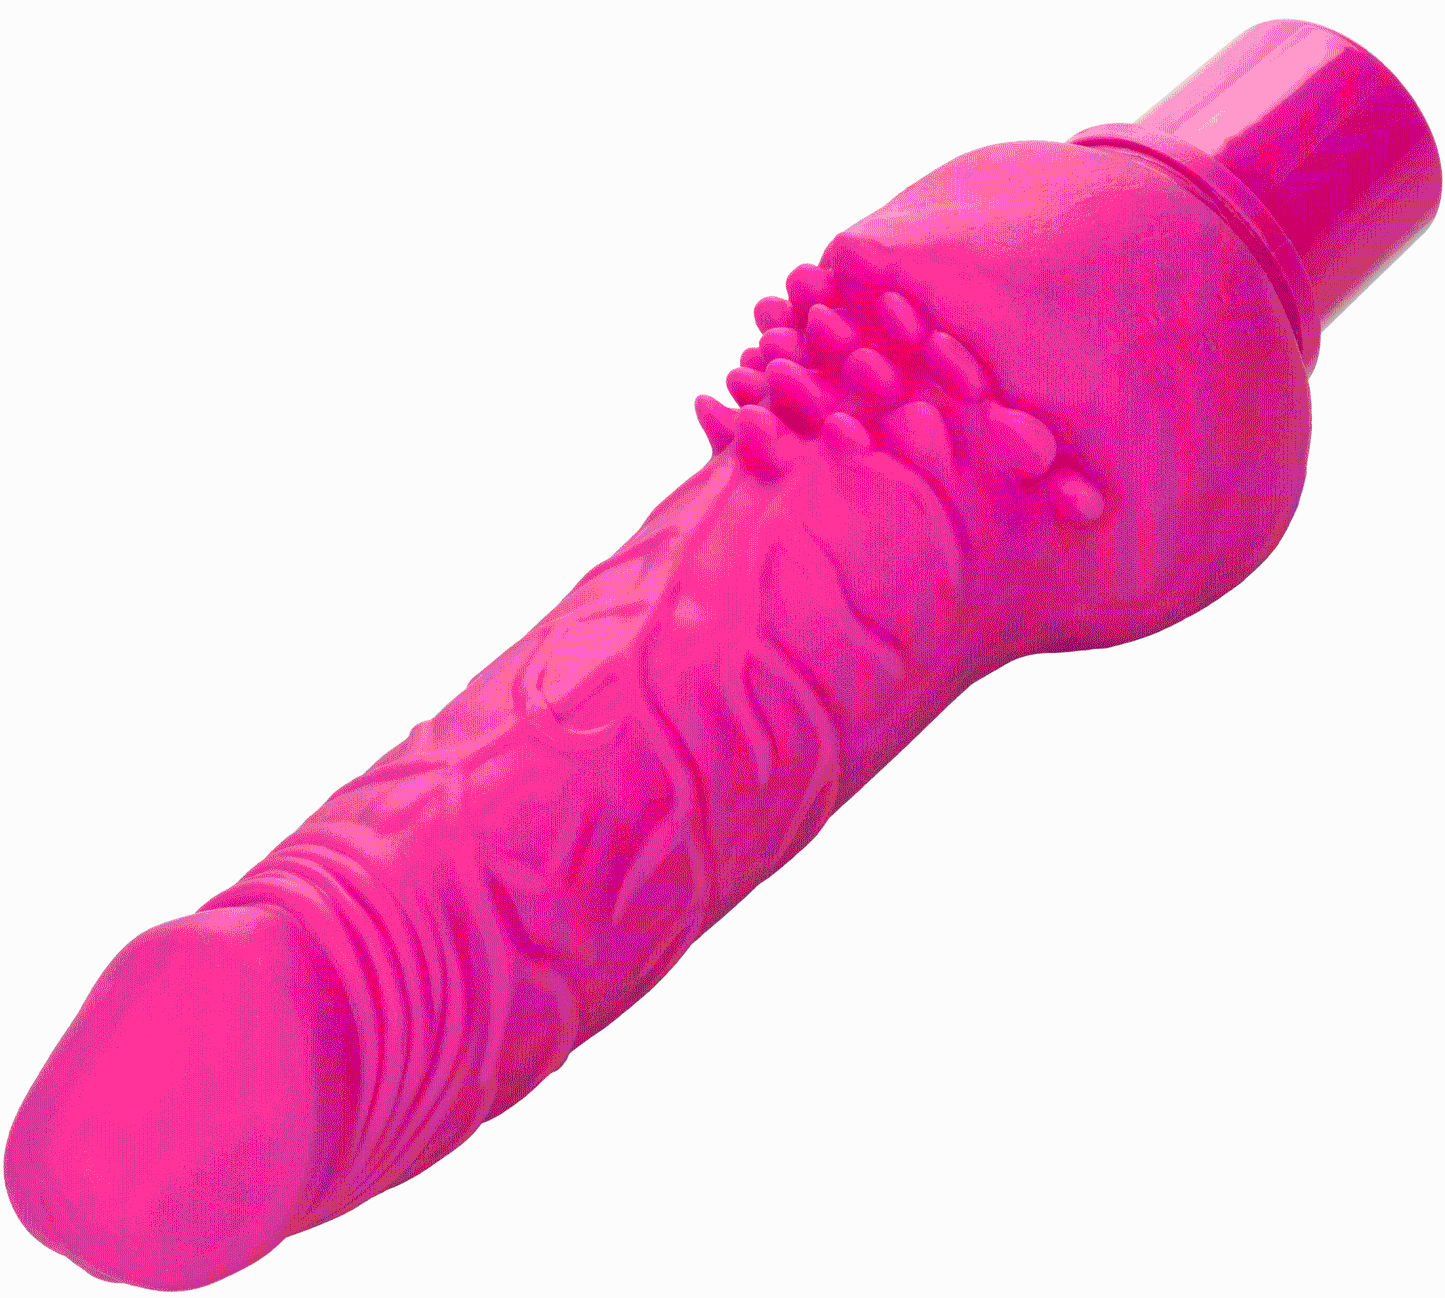 Rechargeable Power Stud Cliterrific - Pink